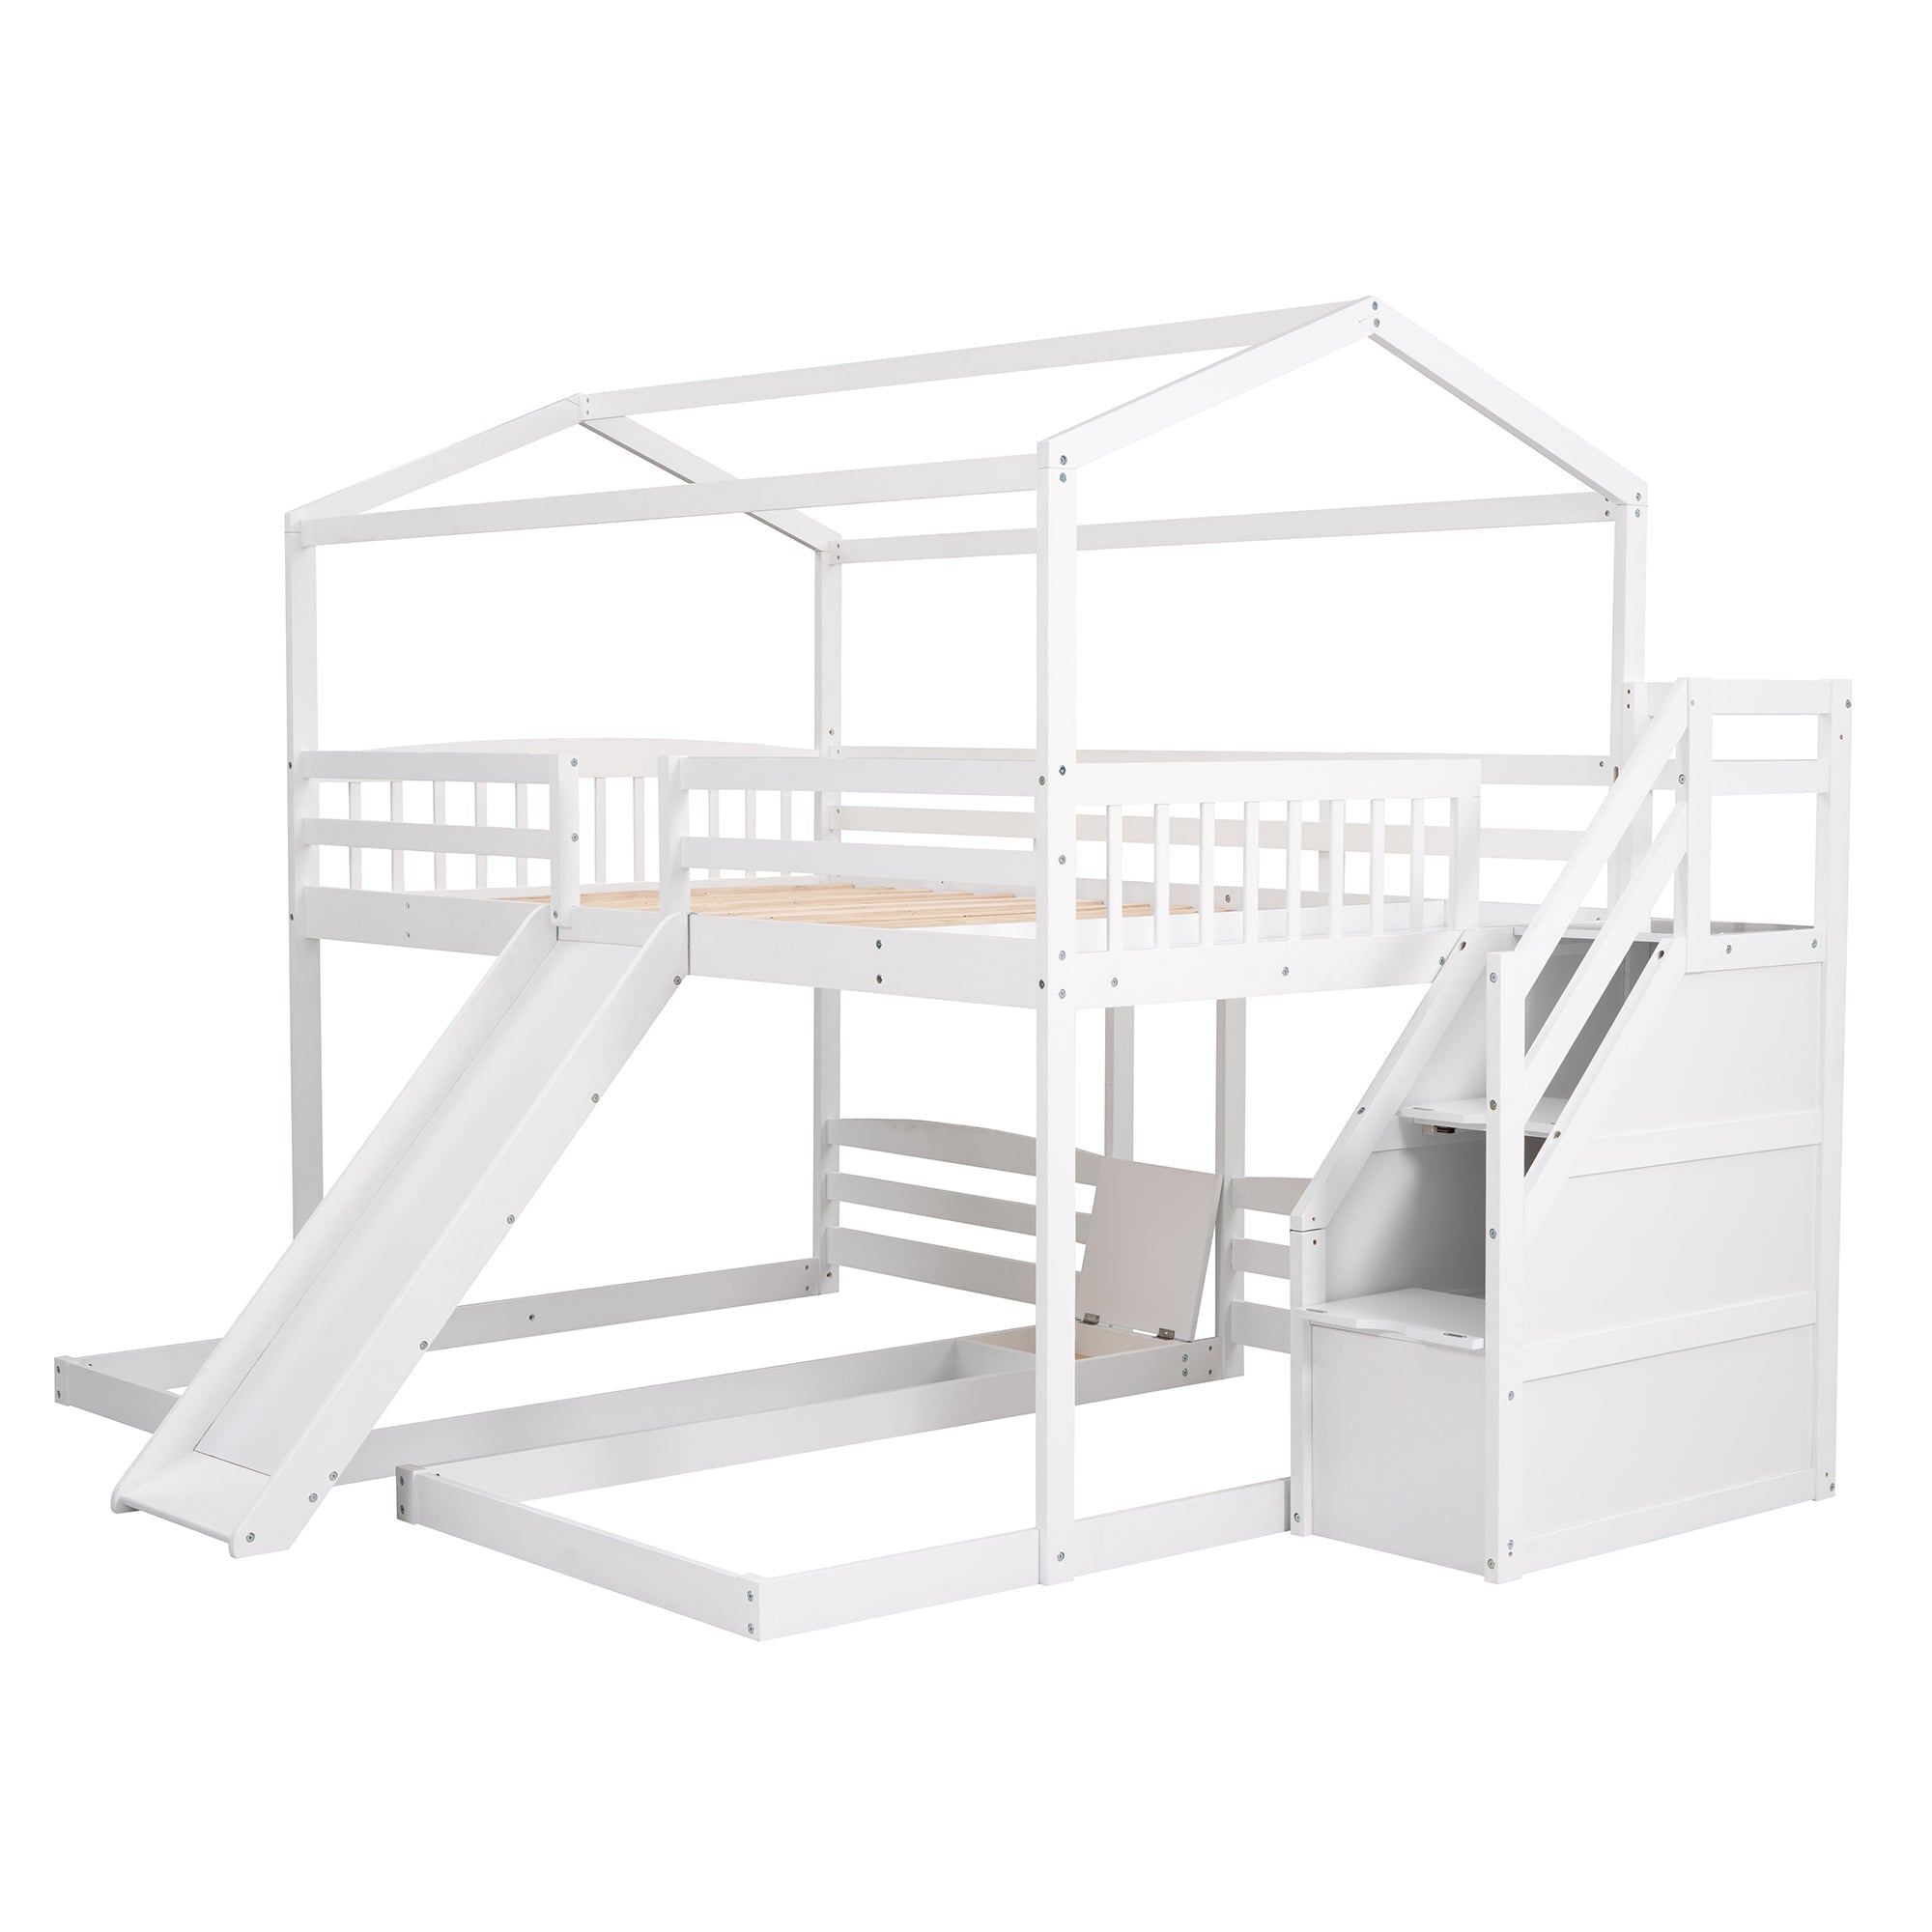 EUROCO Full over Twin & Twin Bunk Bed with Slide and Shelf for Kids, White